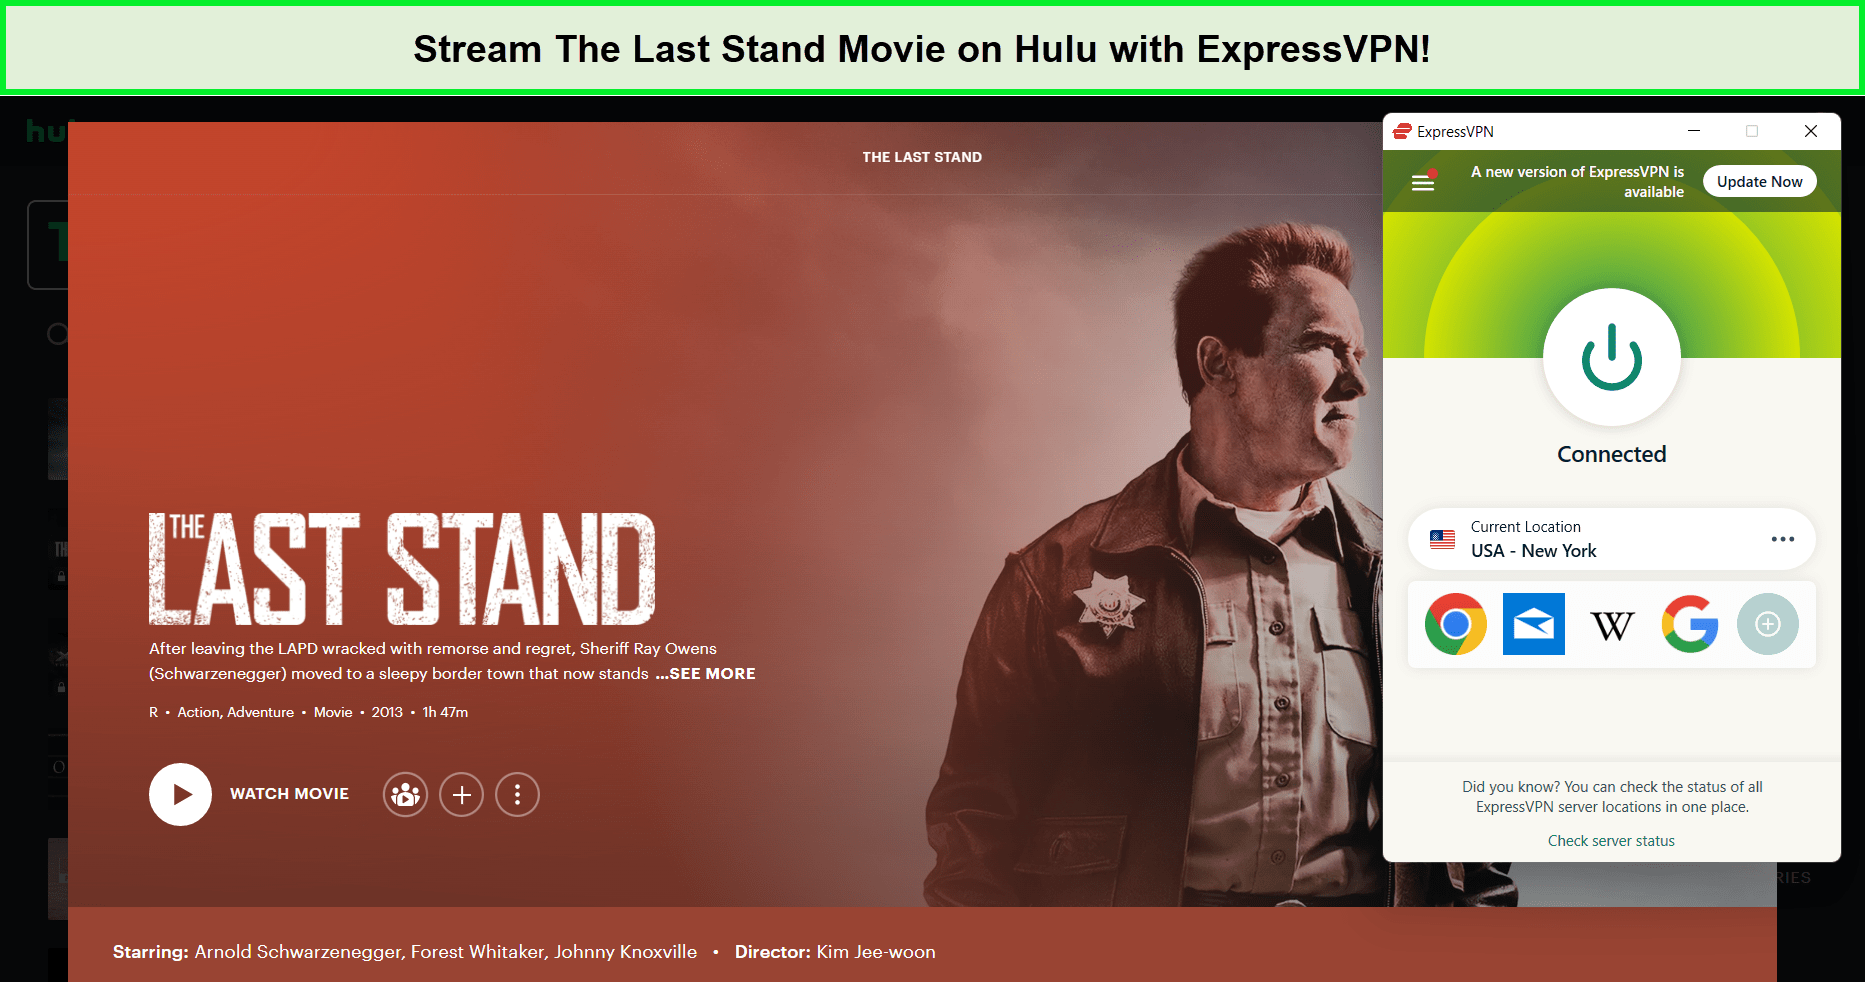 With-ExpressVPN-Watch-The-Last-Stand-Movie-on-Hulu-in-Japan